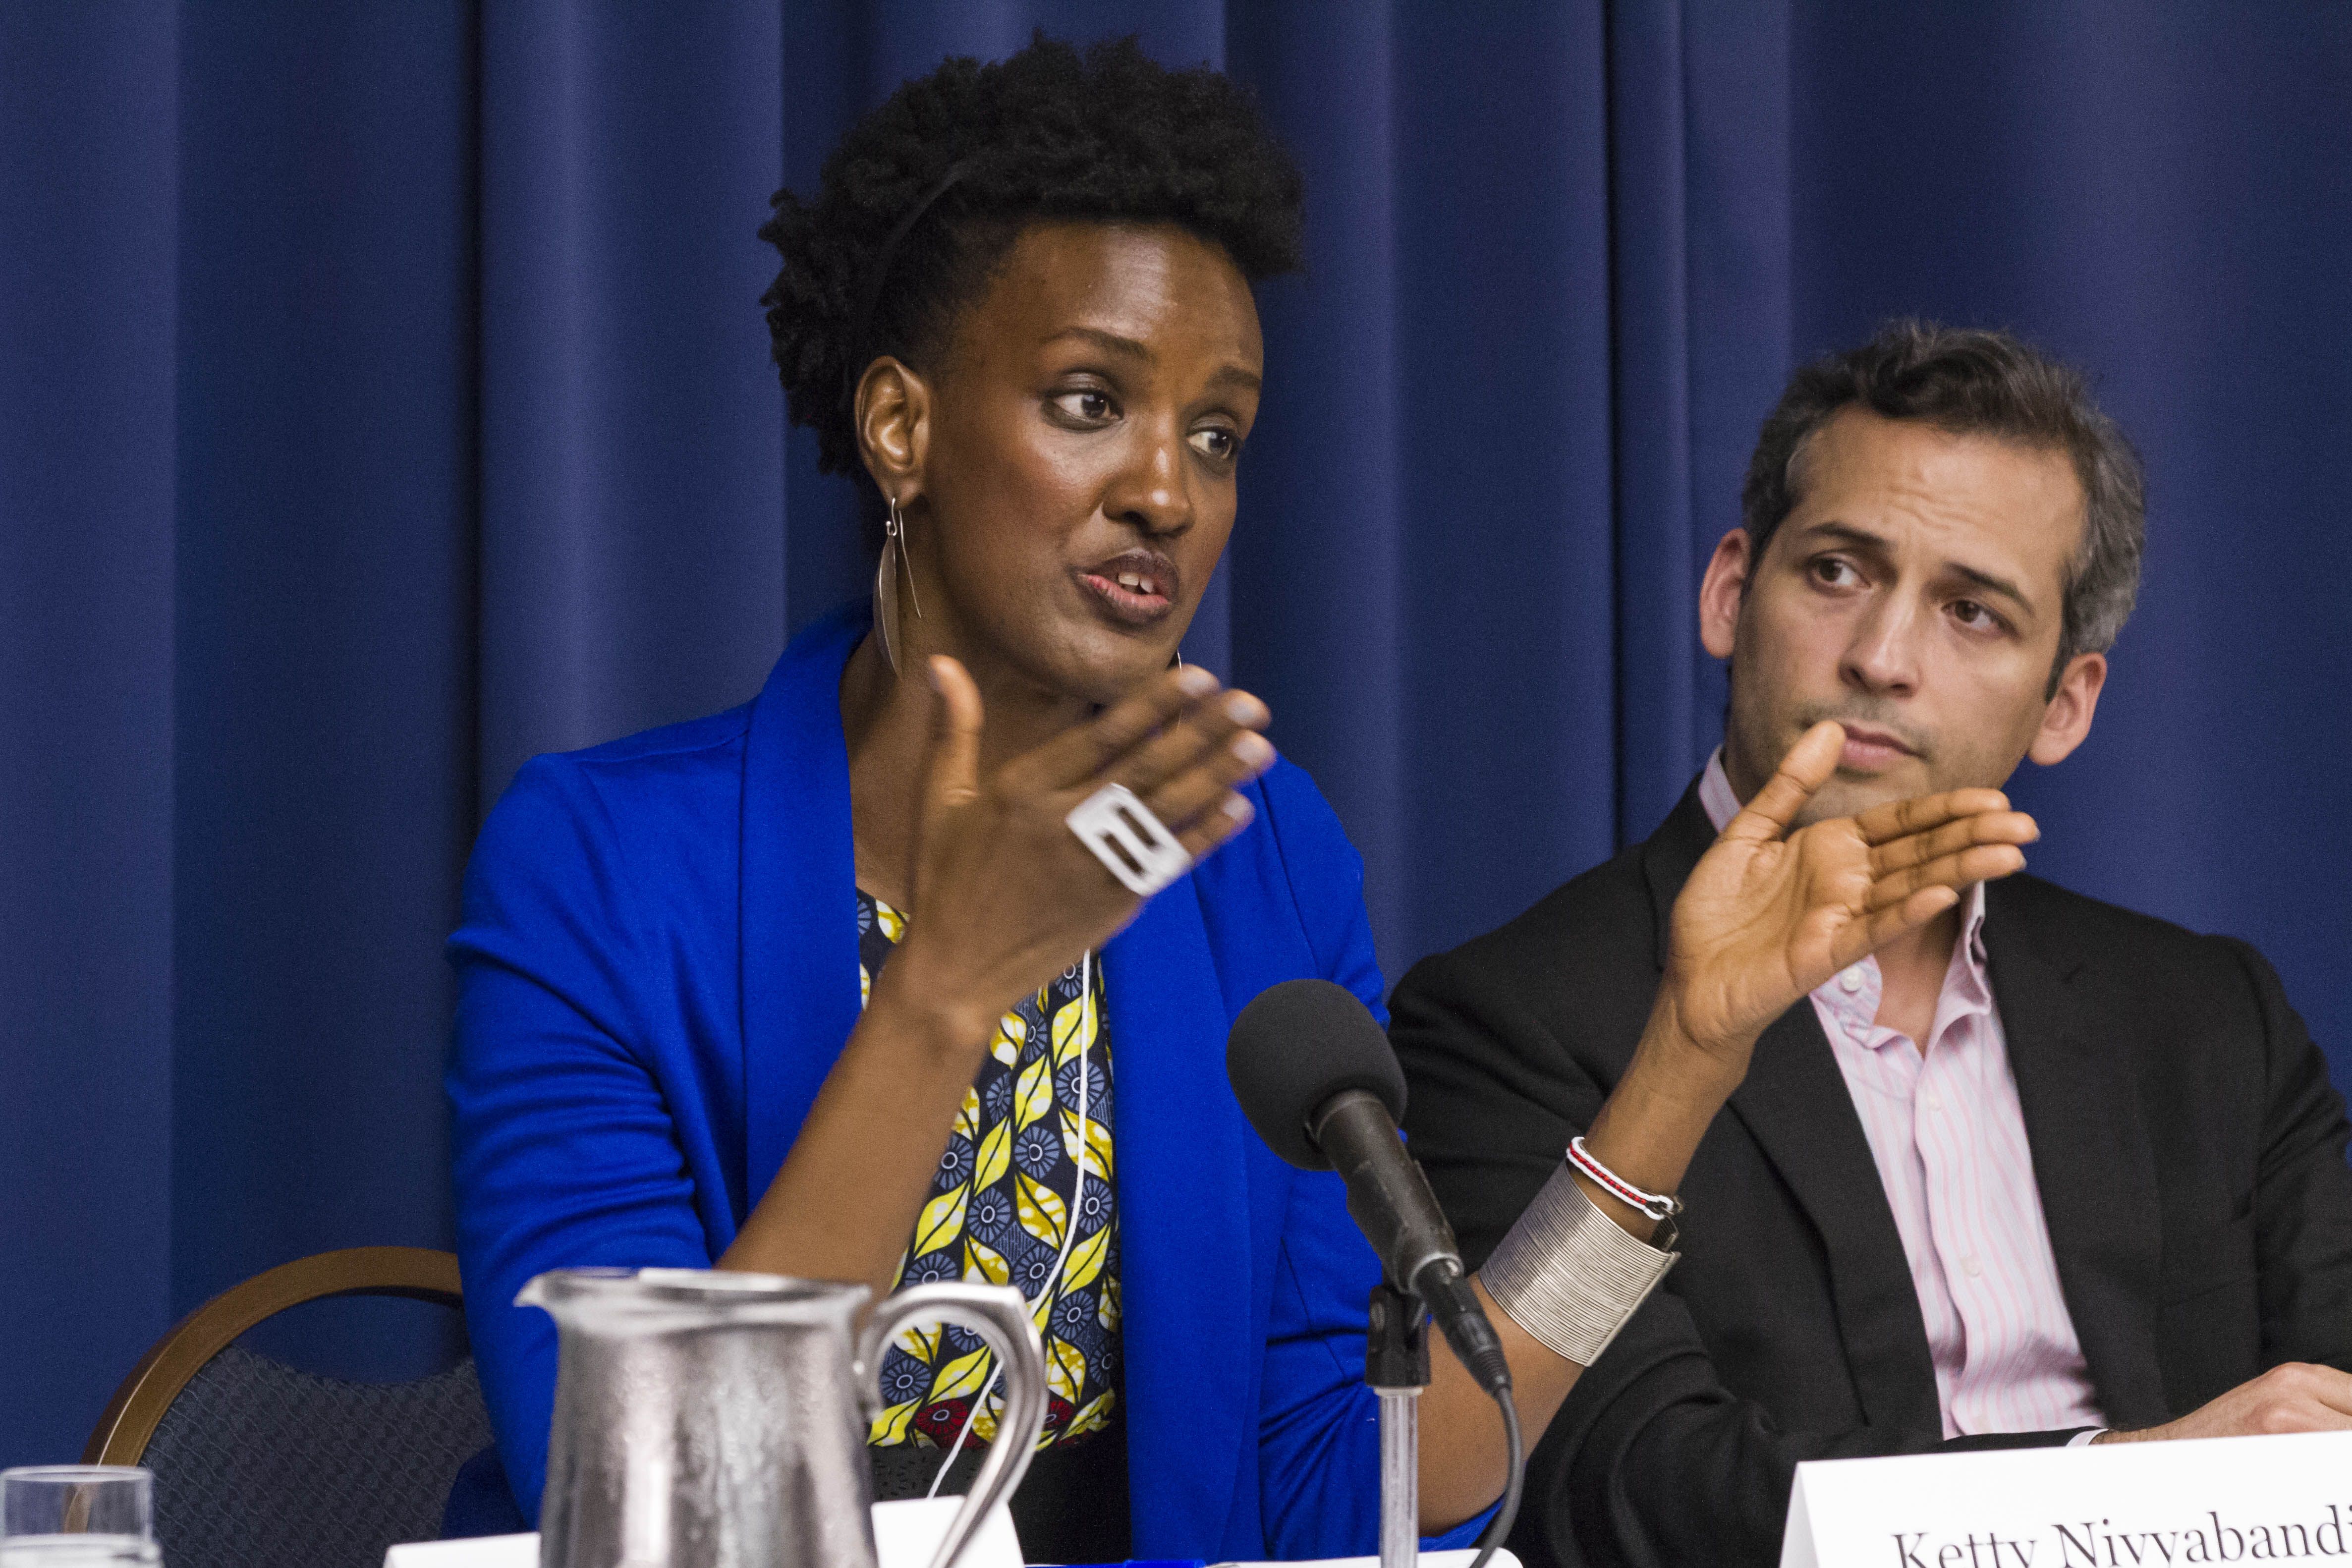 Ketty Nivyabandi, Burundian activist, speaks on a panel about the role of social media in conflict and peace reporting. Image by Jin Ding. Washington, DC, 2018.